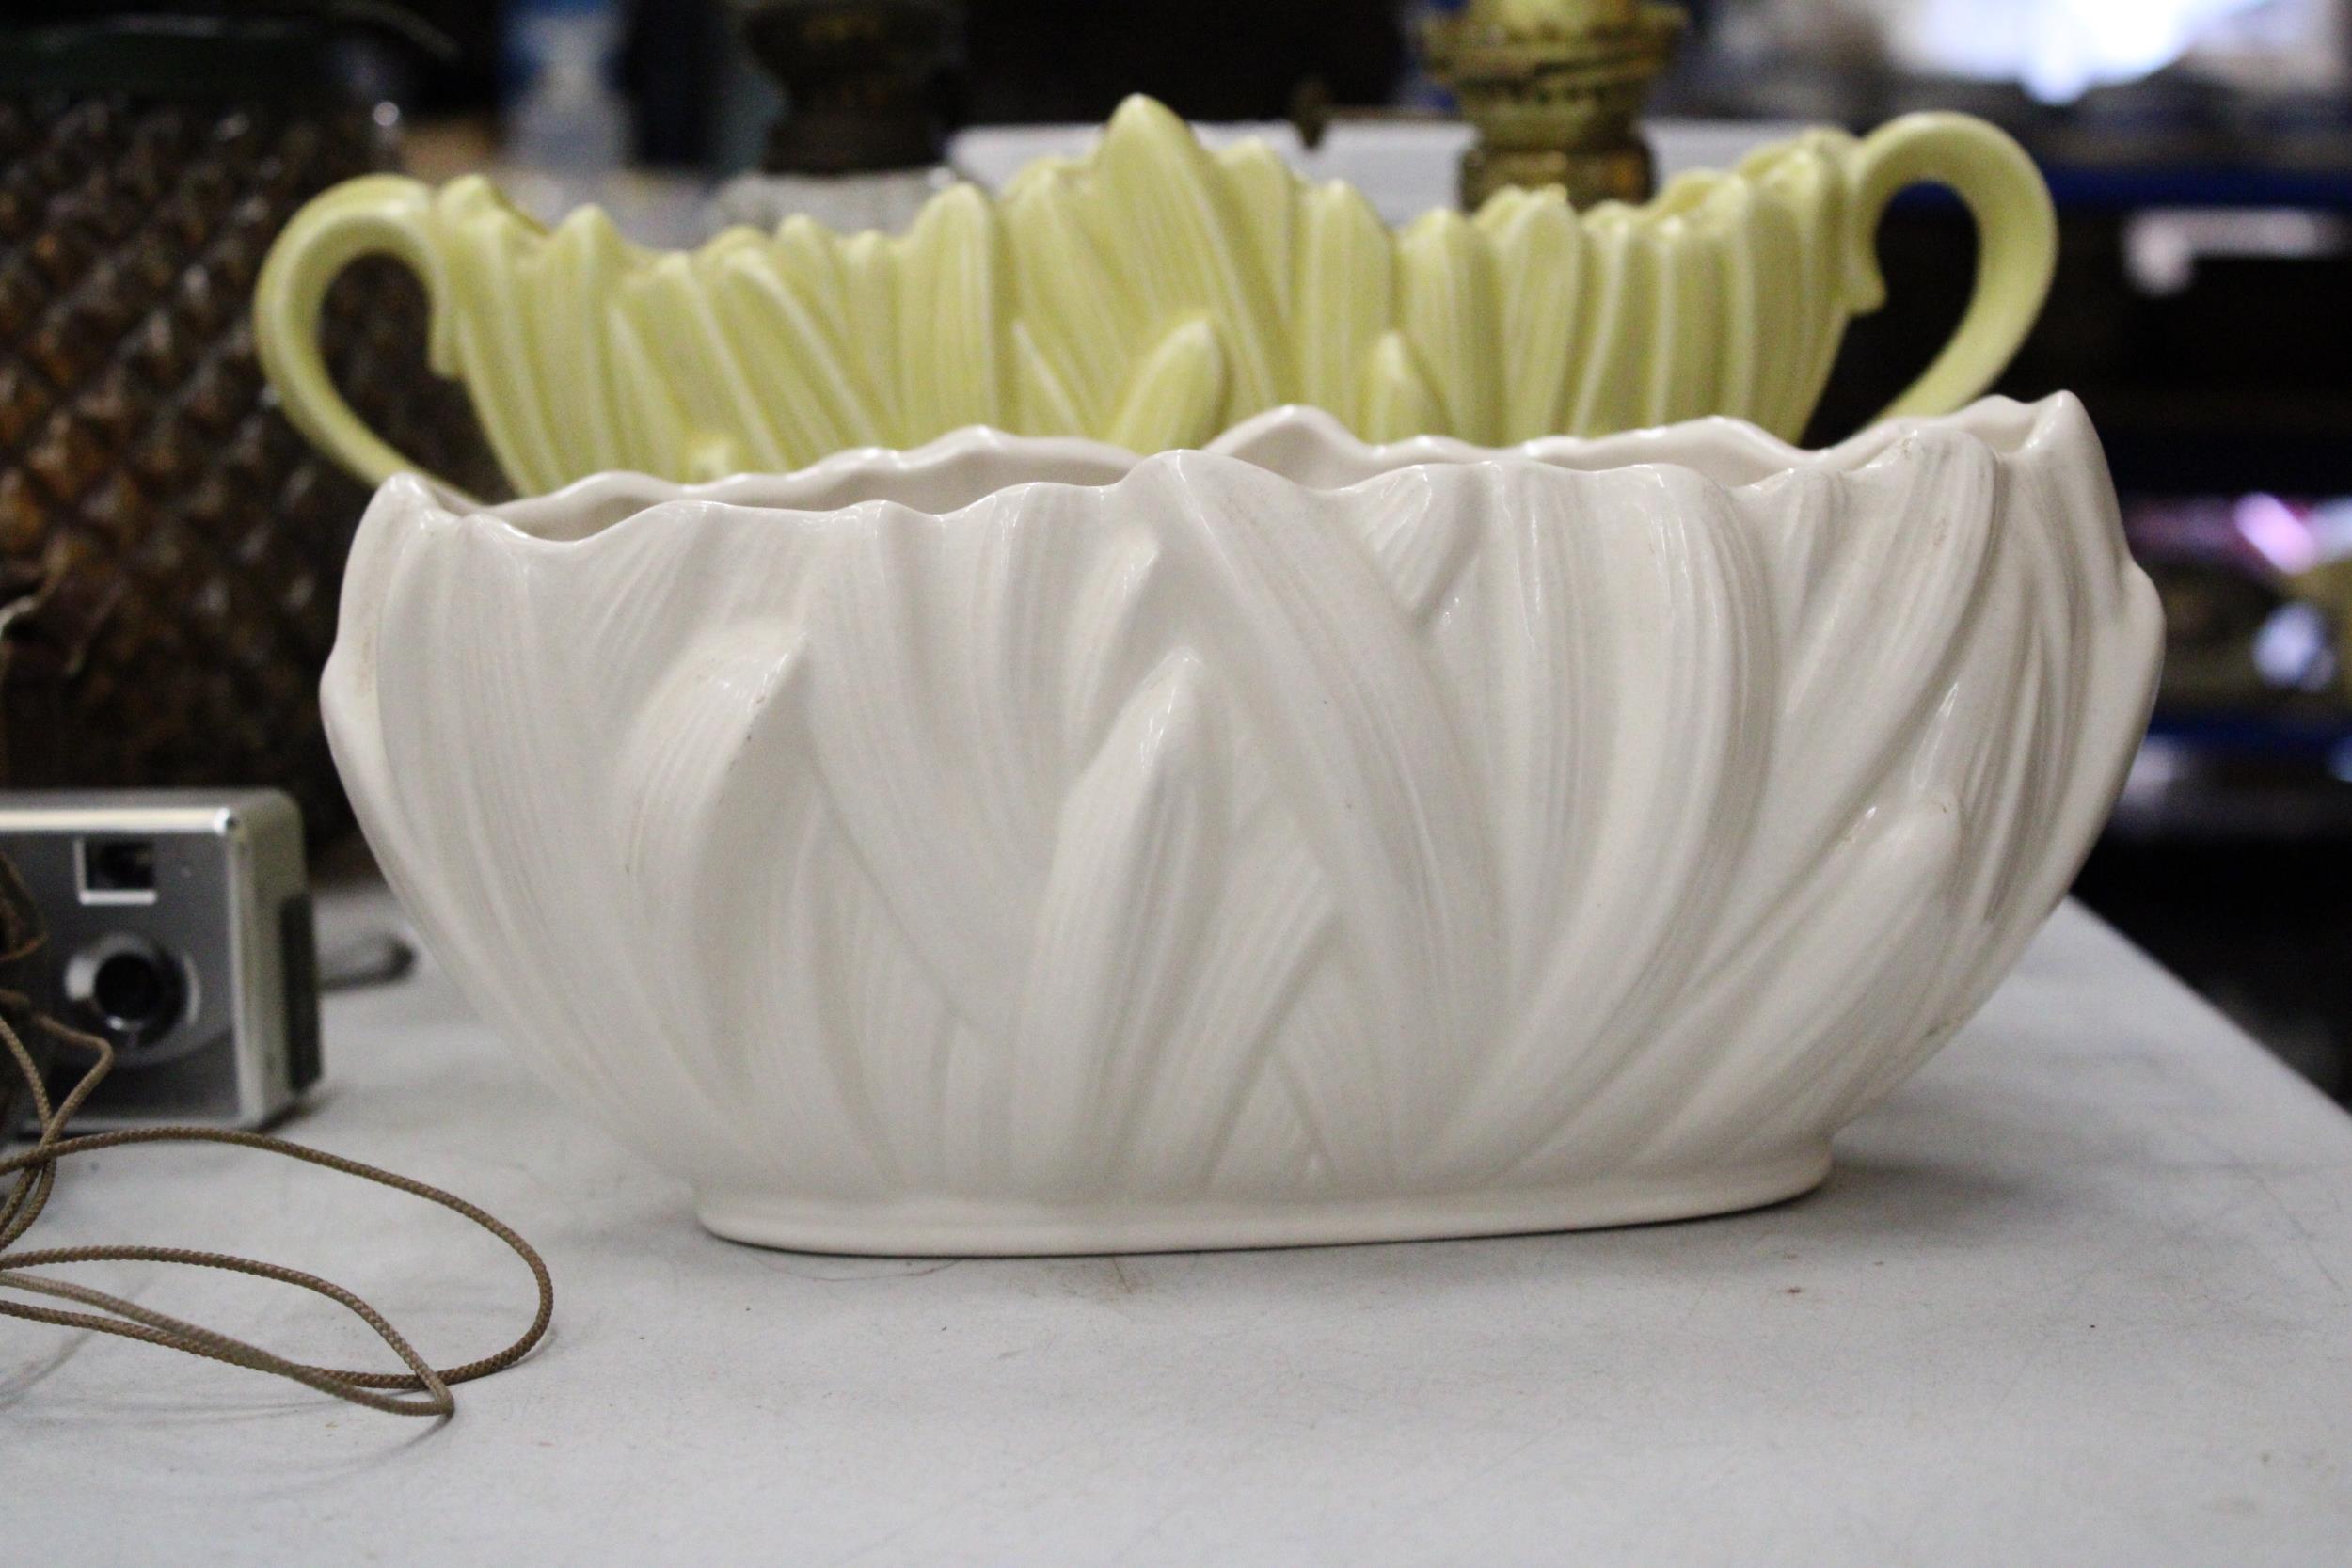 THREE VINTAGE SLYVAC PLANTERS TO INCLUDE PRIMROSE YELLOW - Image 3 of 6